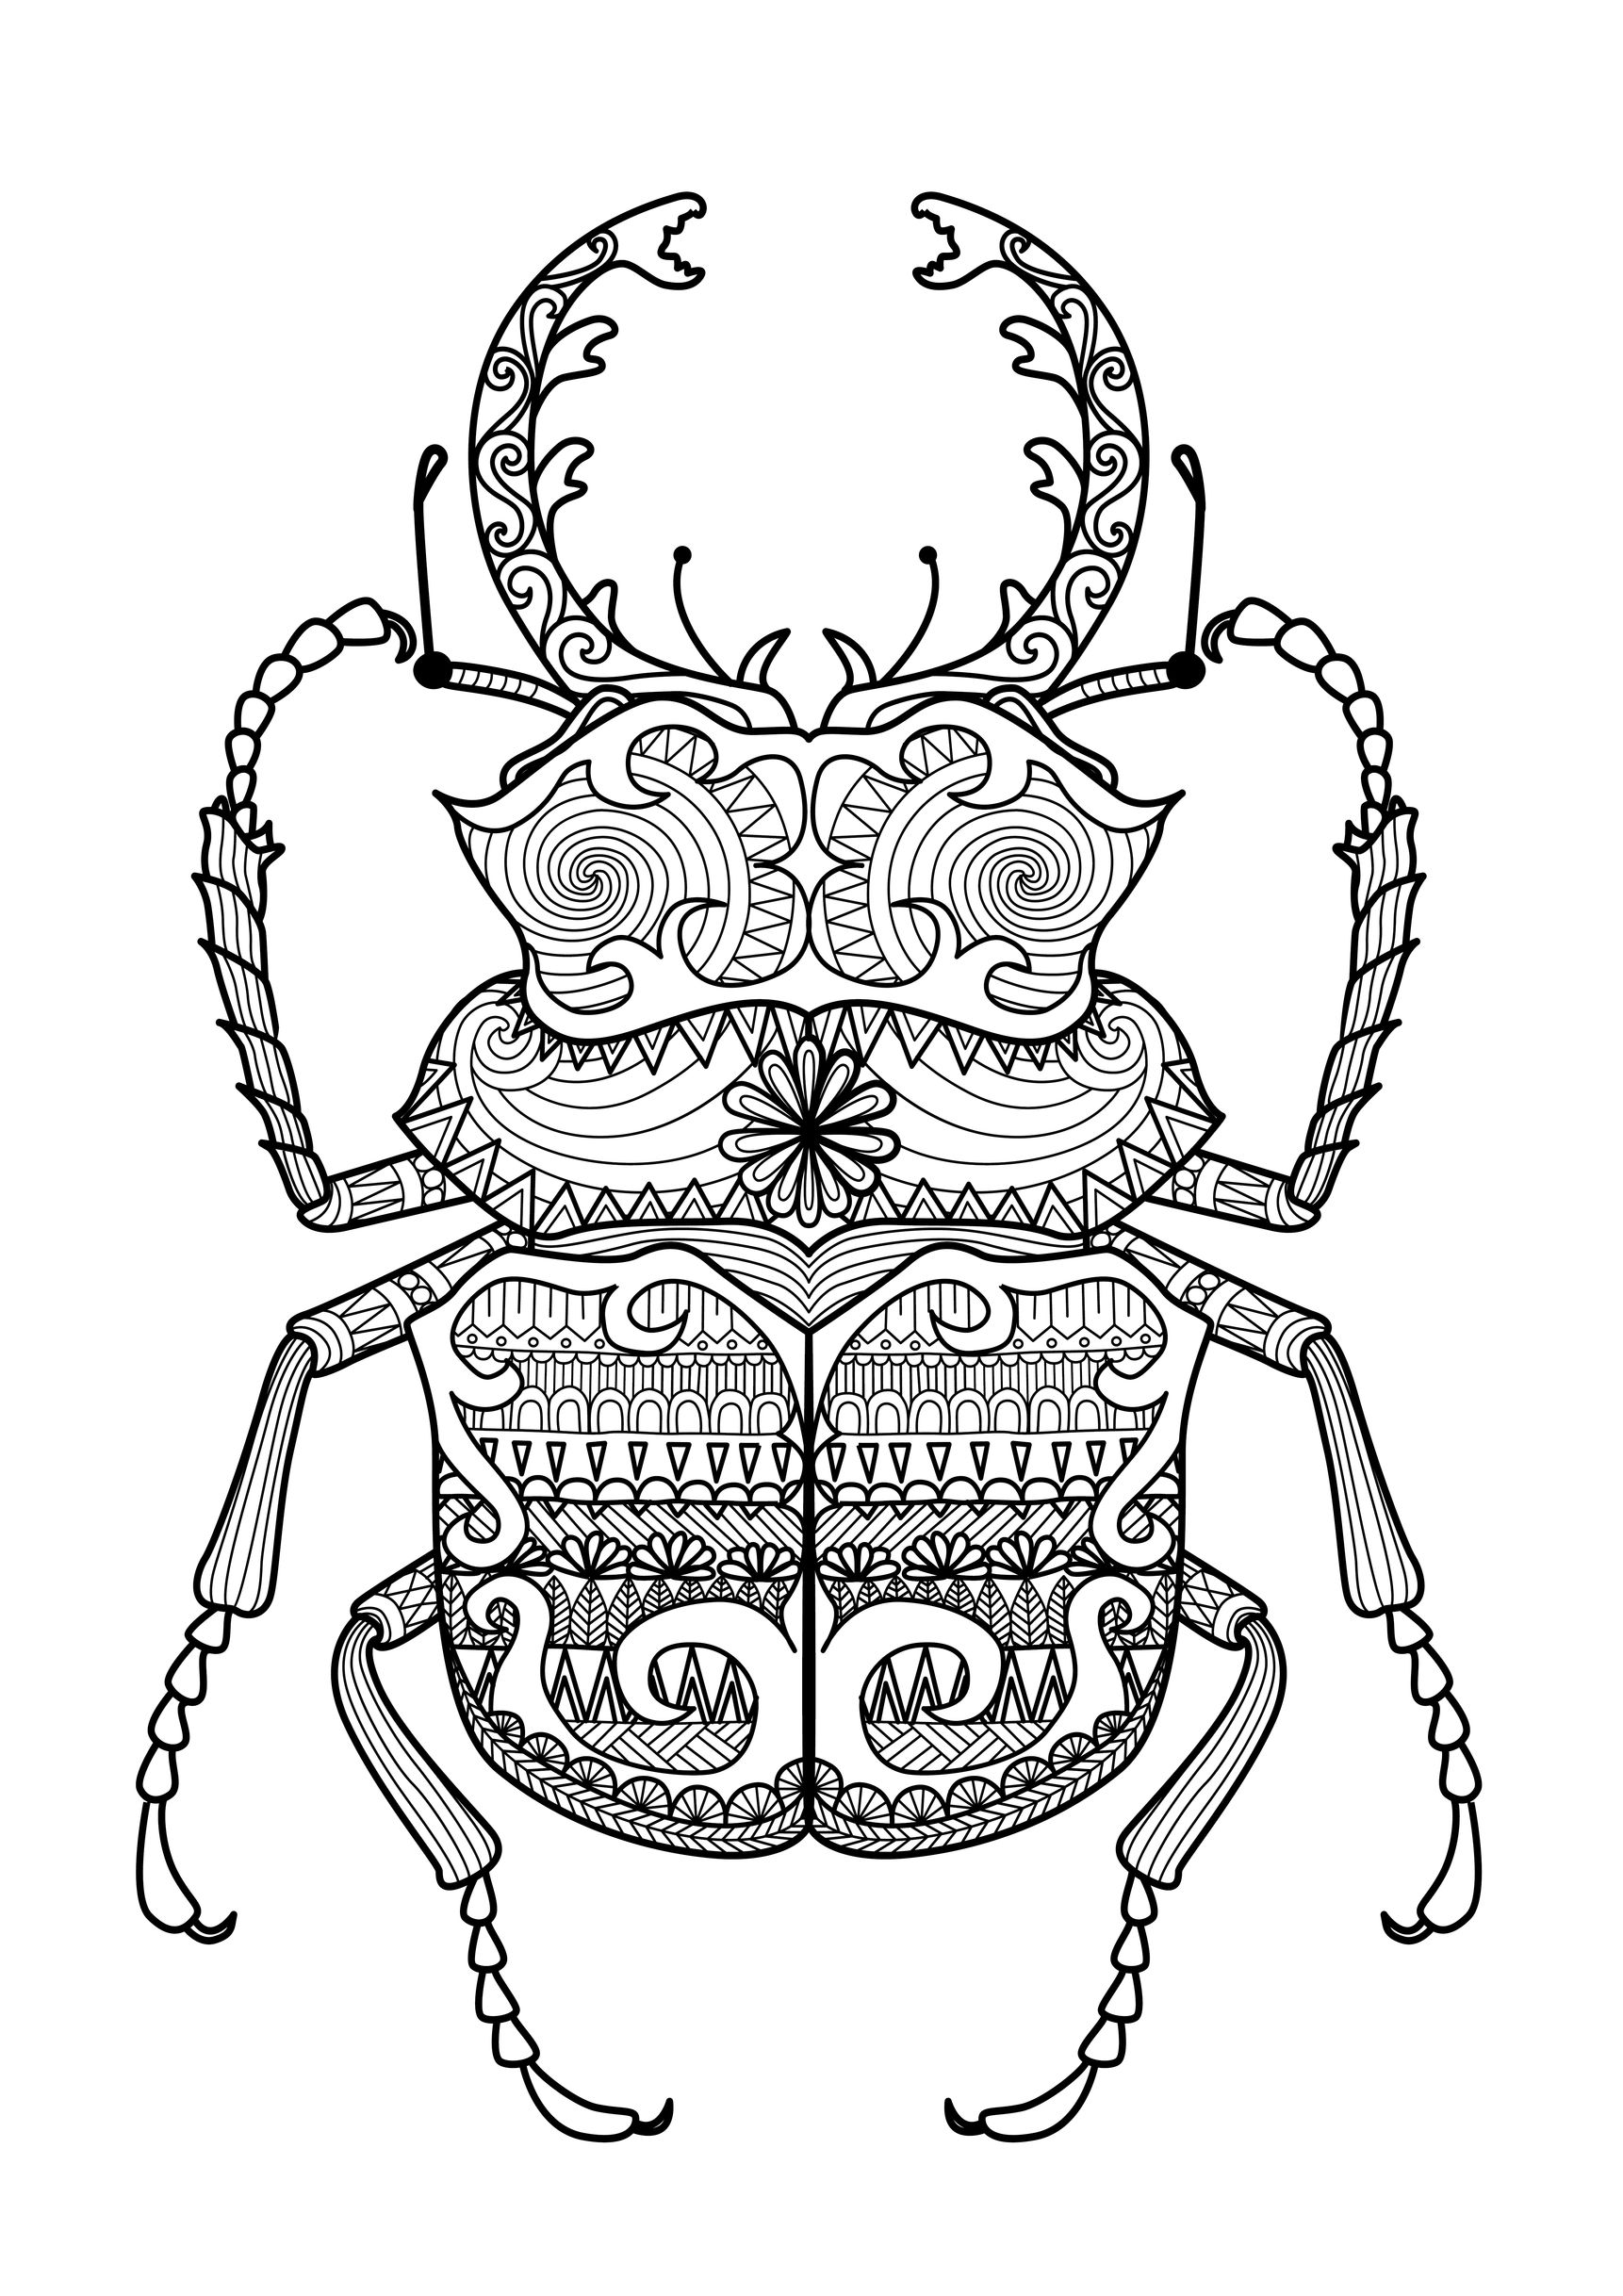 zentangle-beetle-zentangle-adult-coloring-pages-page-2